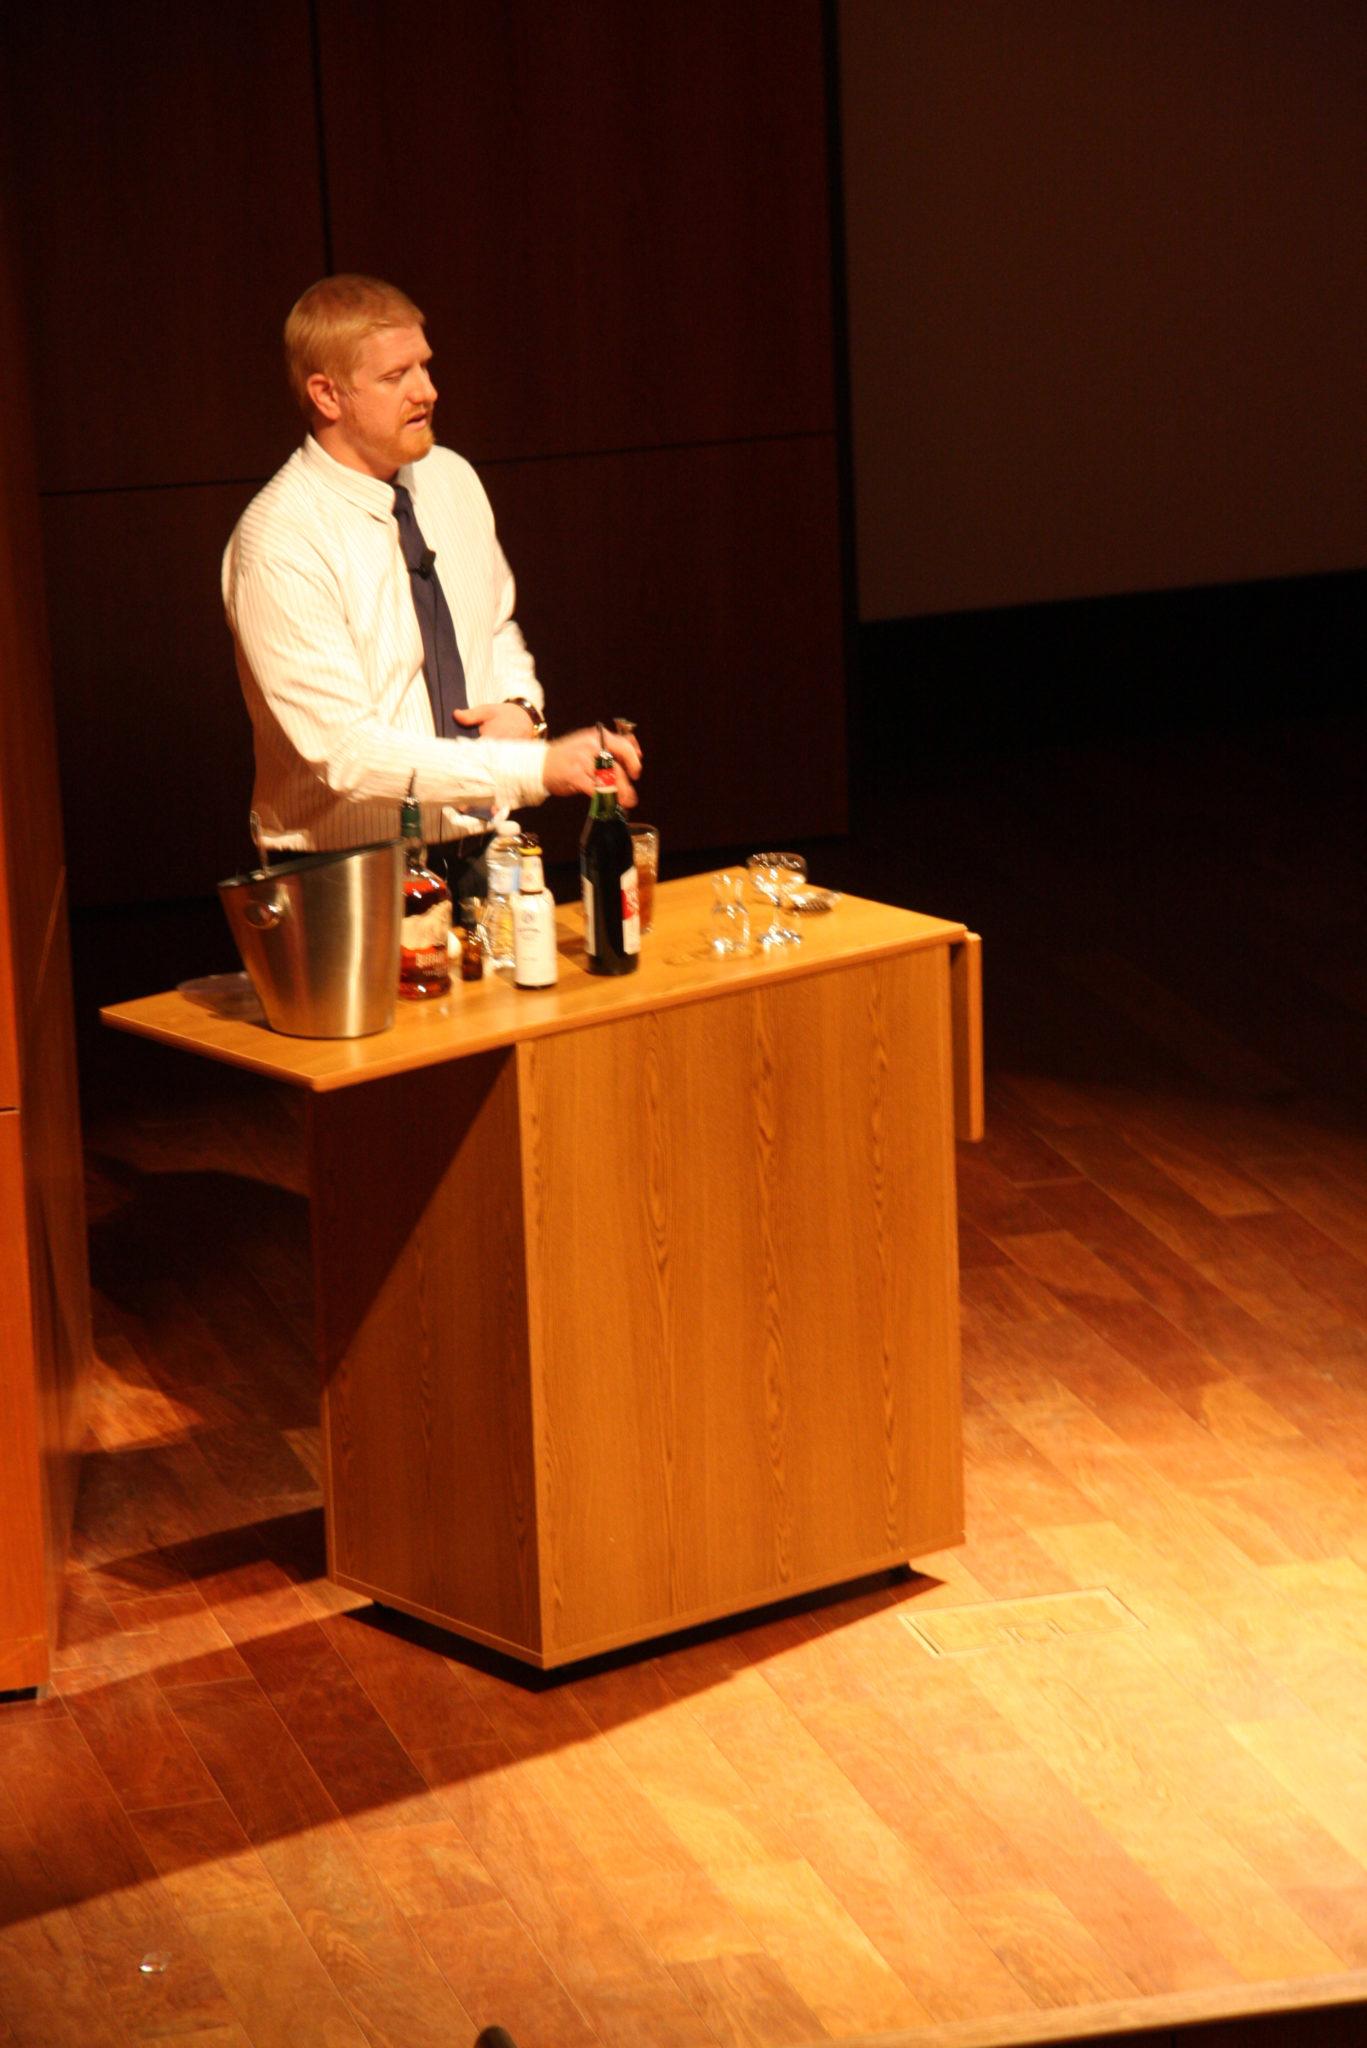 Ryan Maybee demonstrates how to make a “Pendergast” cocktail.